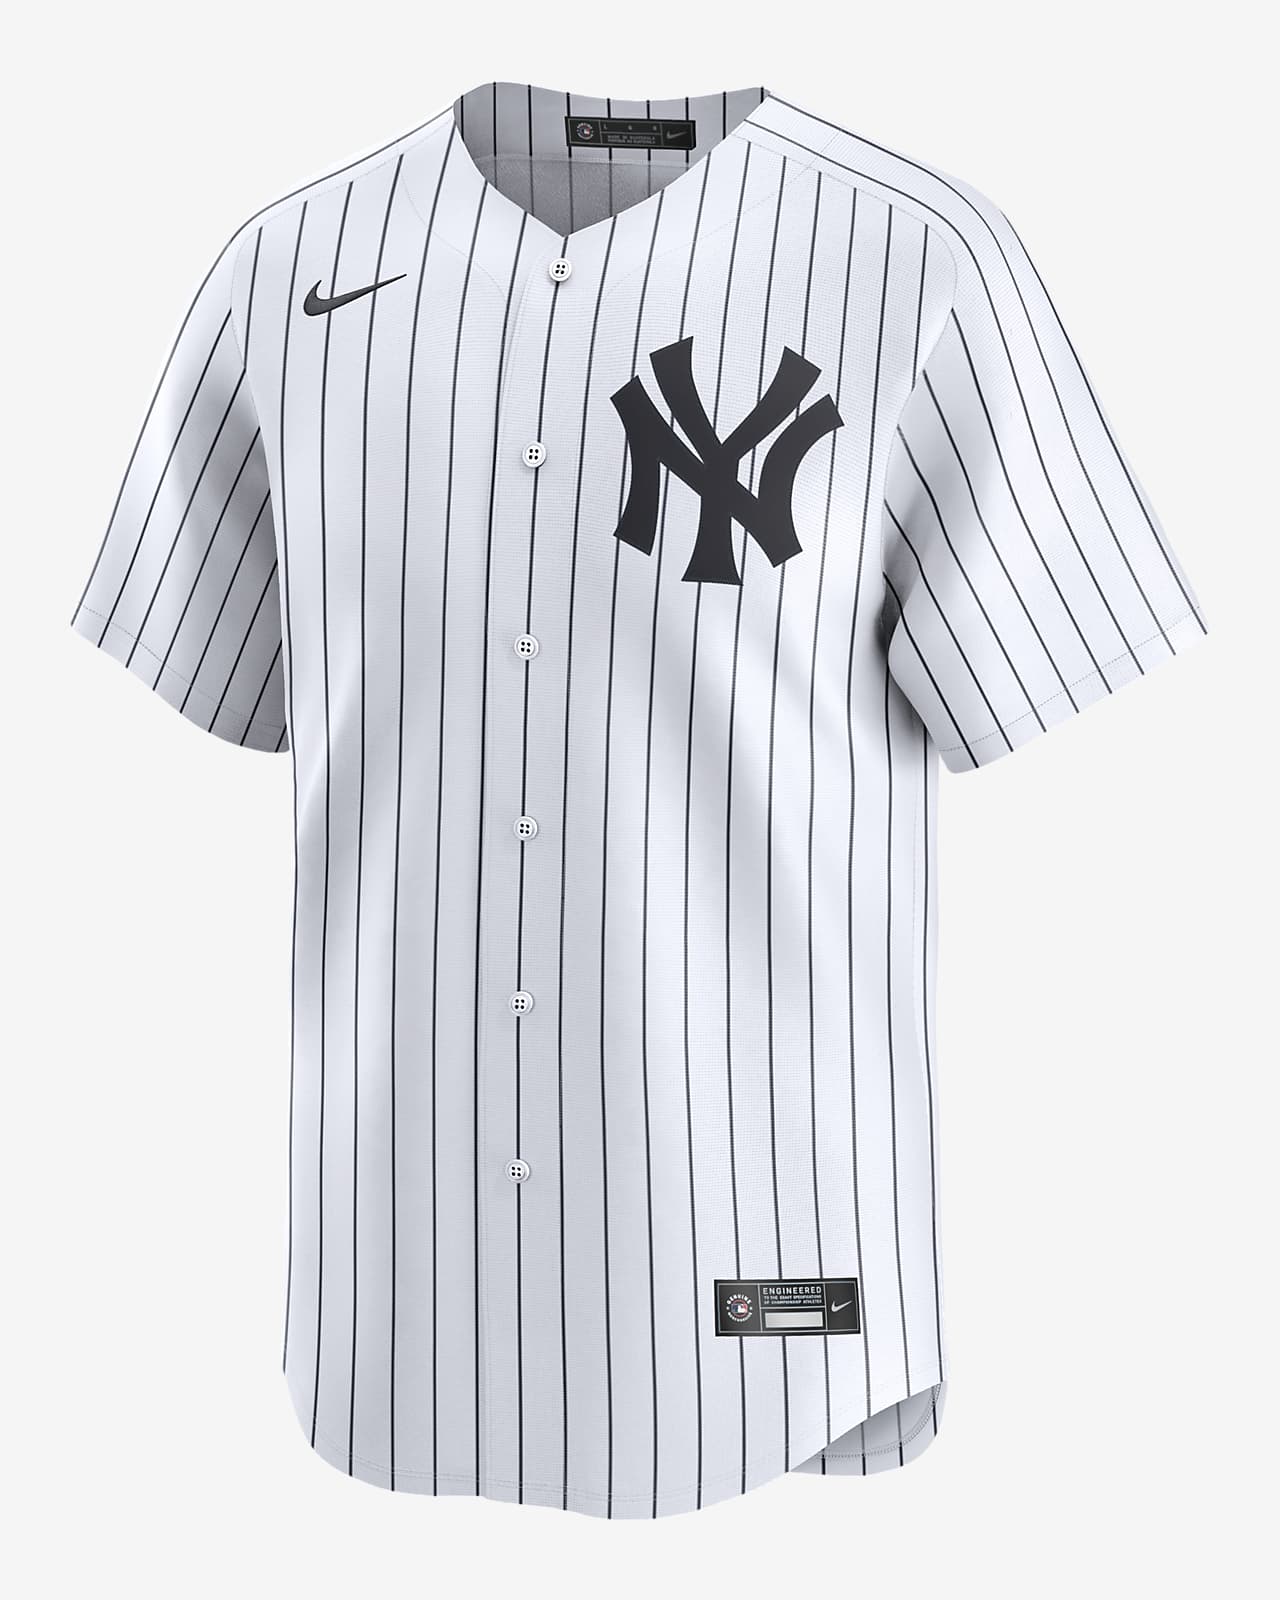 Anthony Volpe New York Yankees Men's Nike Dri-FIT ADV MLB Limited Jersey